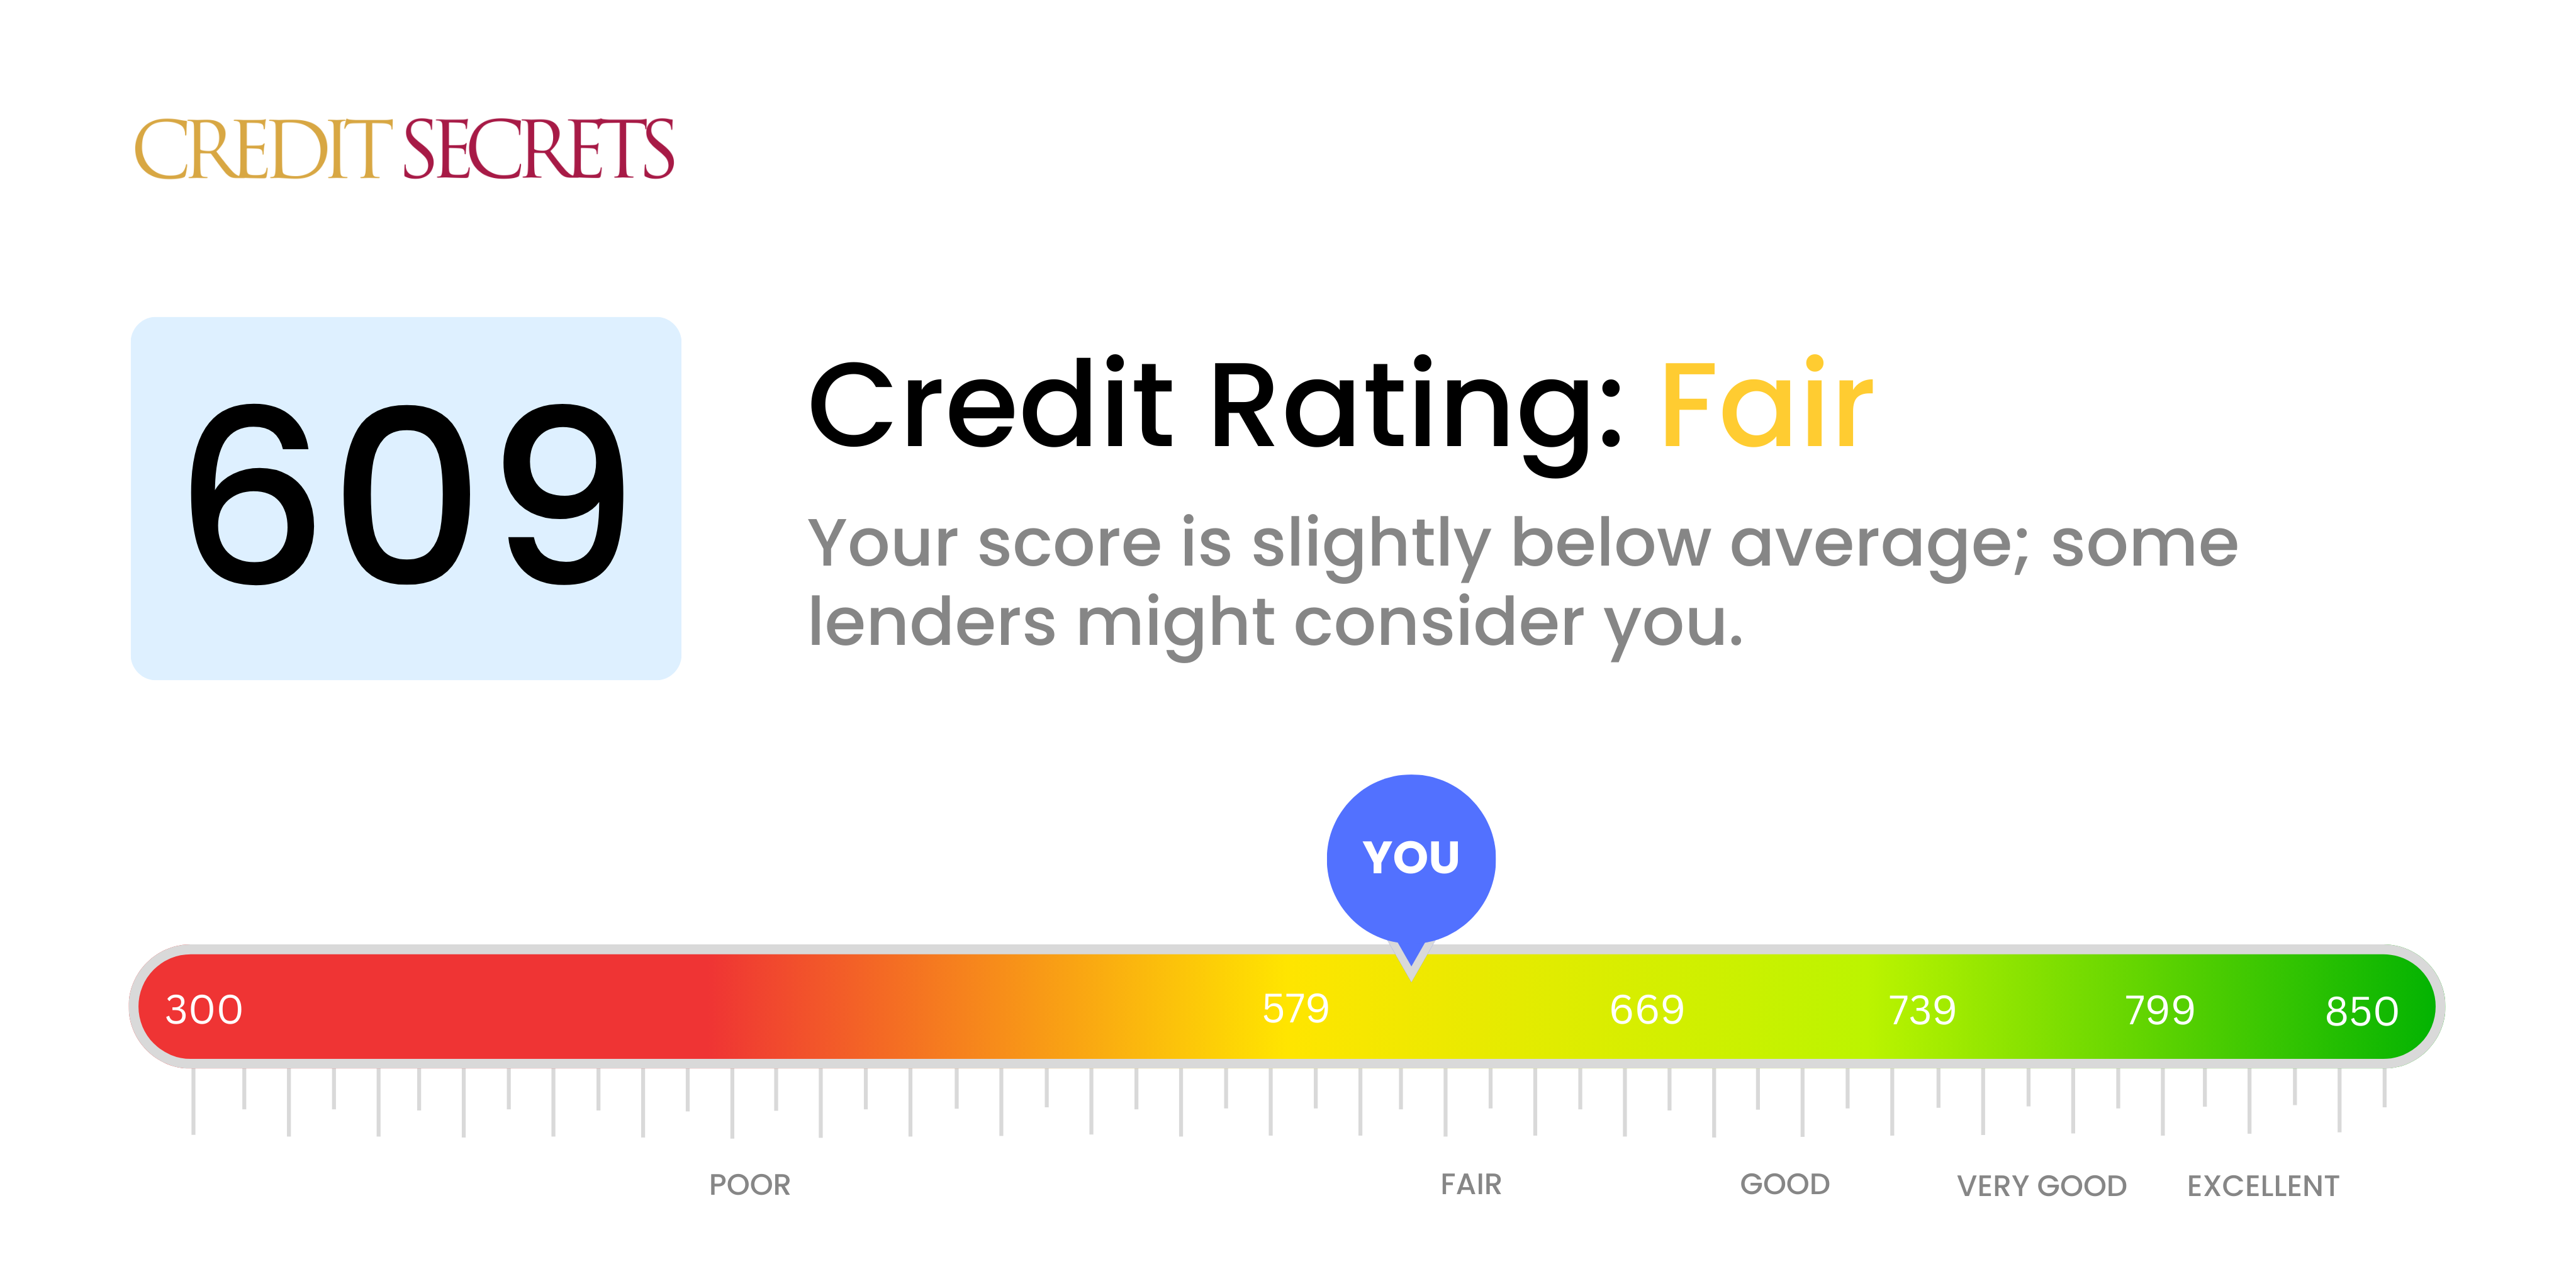 Is 609 a good credit score?